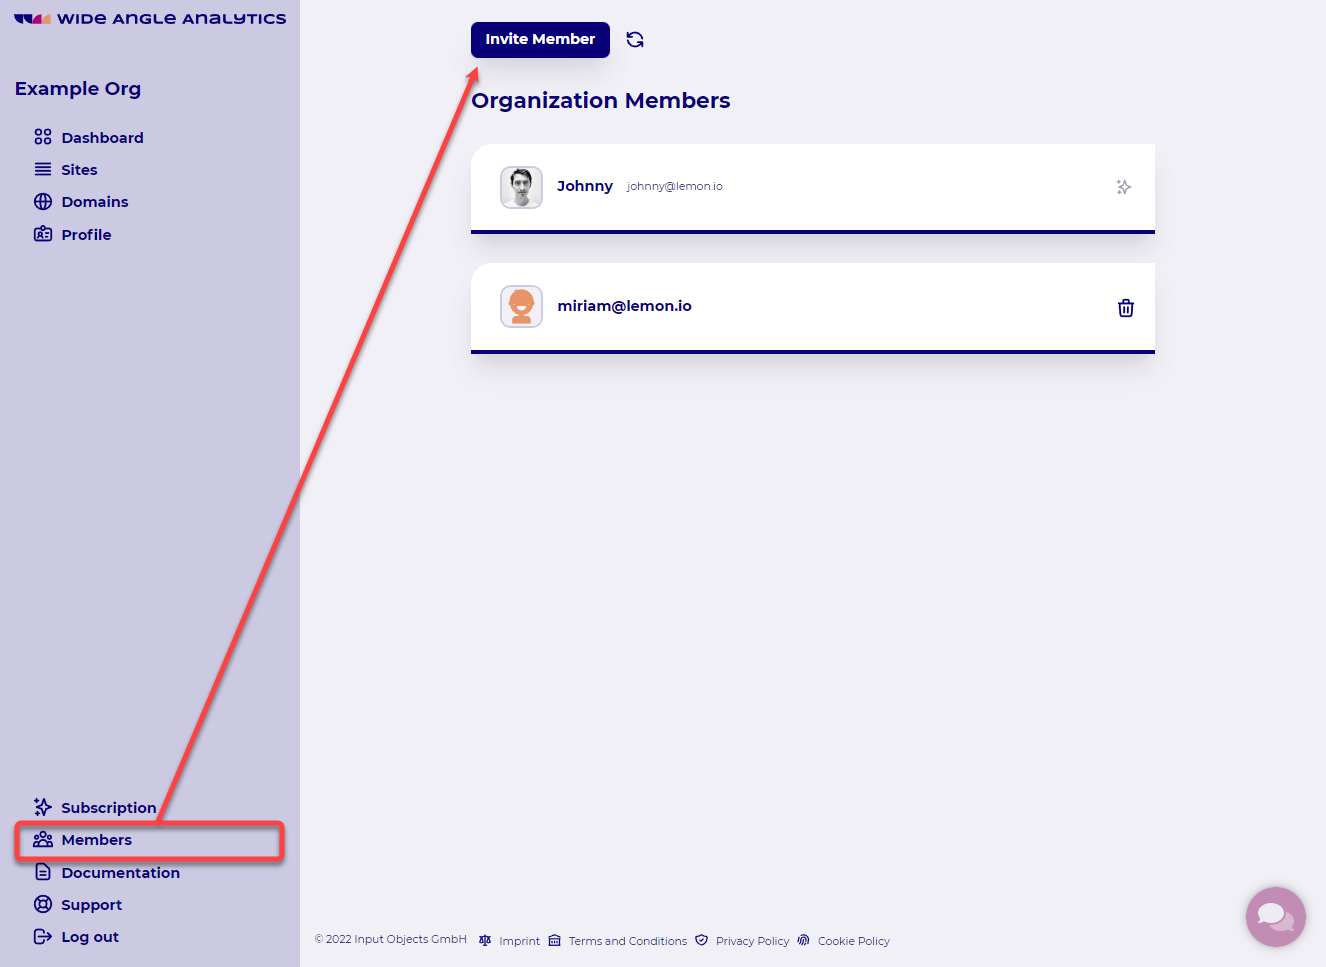 You will find Invite Member action button in the Members section